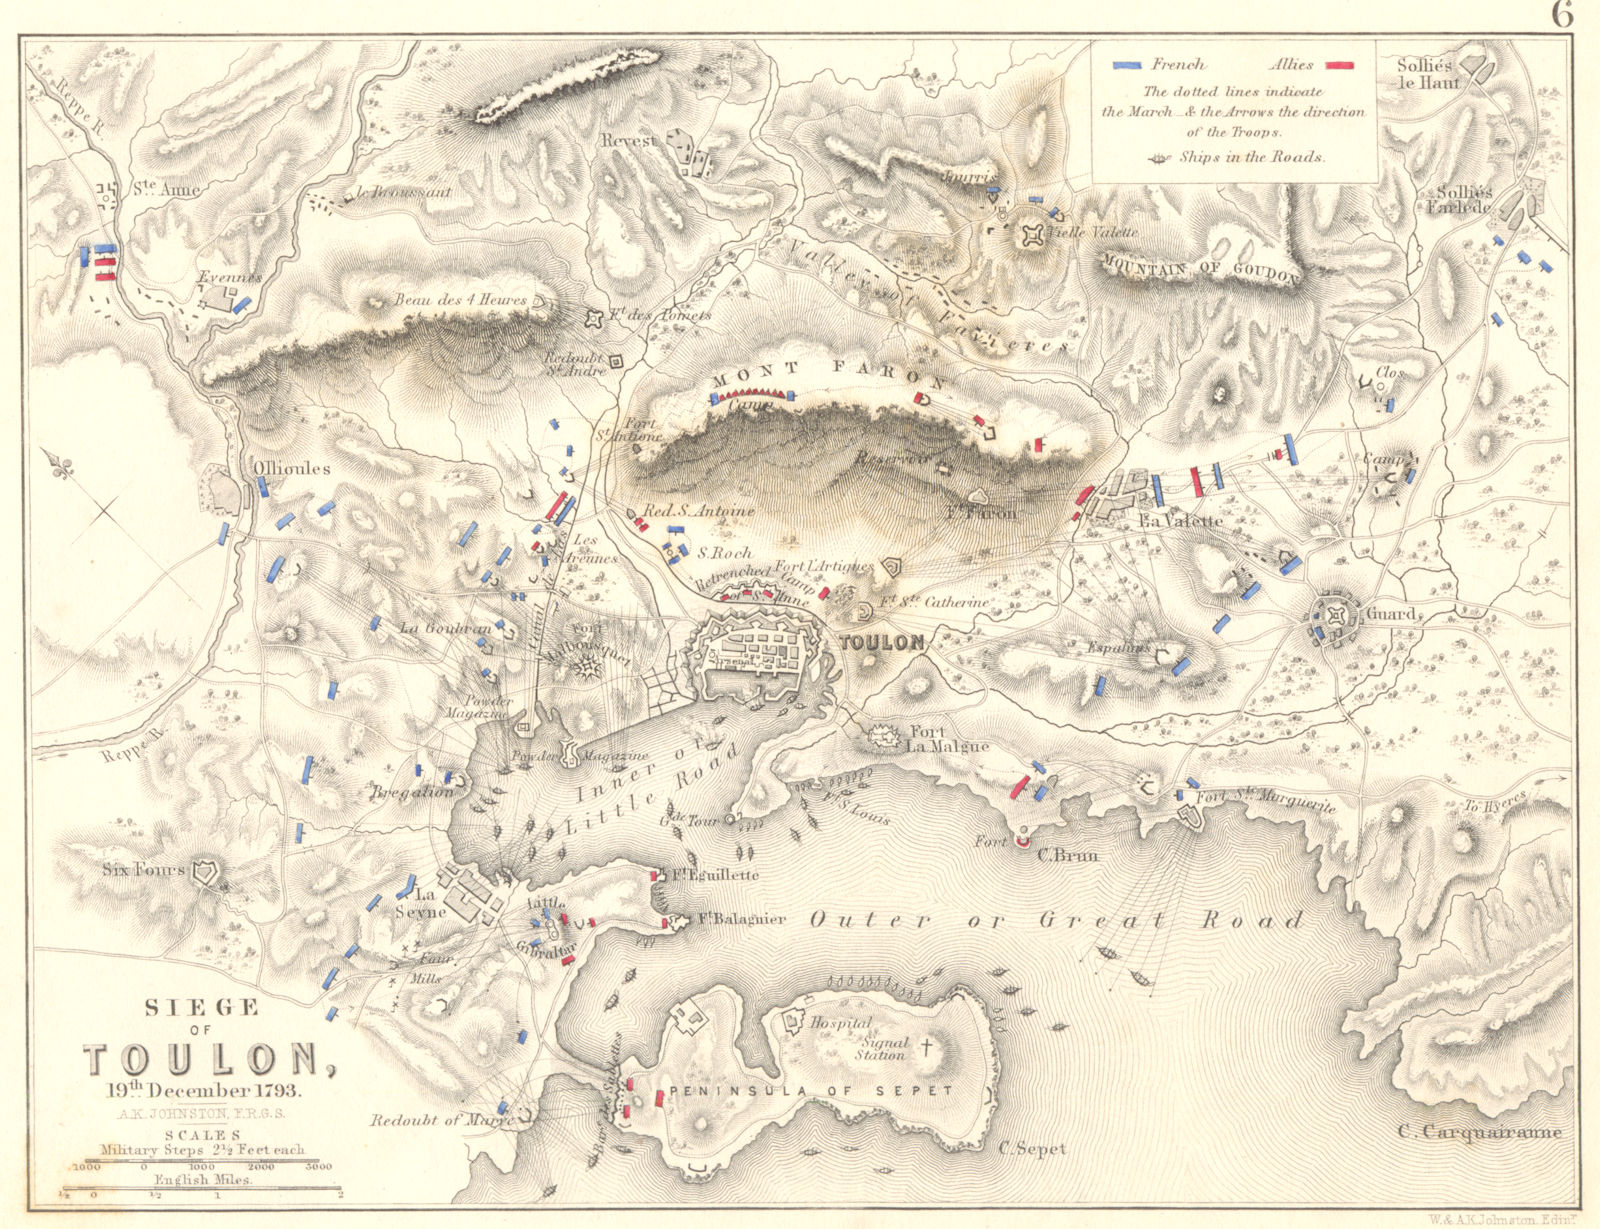 SIEGE OF TOULON. 19th December 1793. Var. French Revolutionary Wars 1848 map